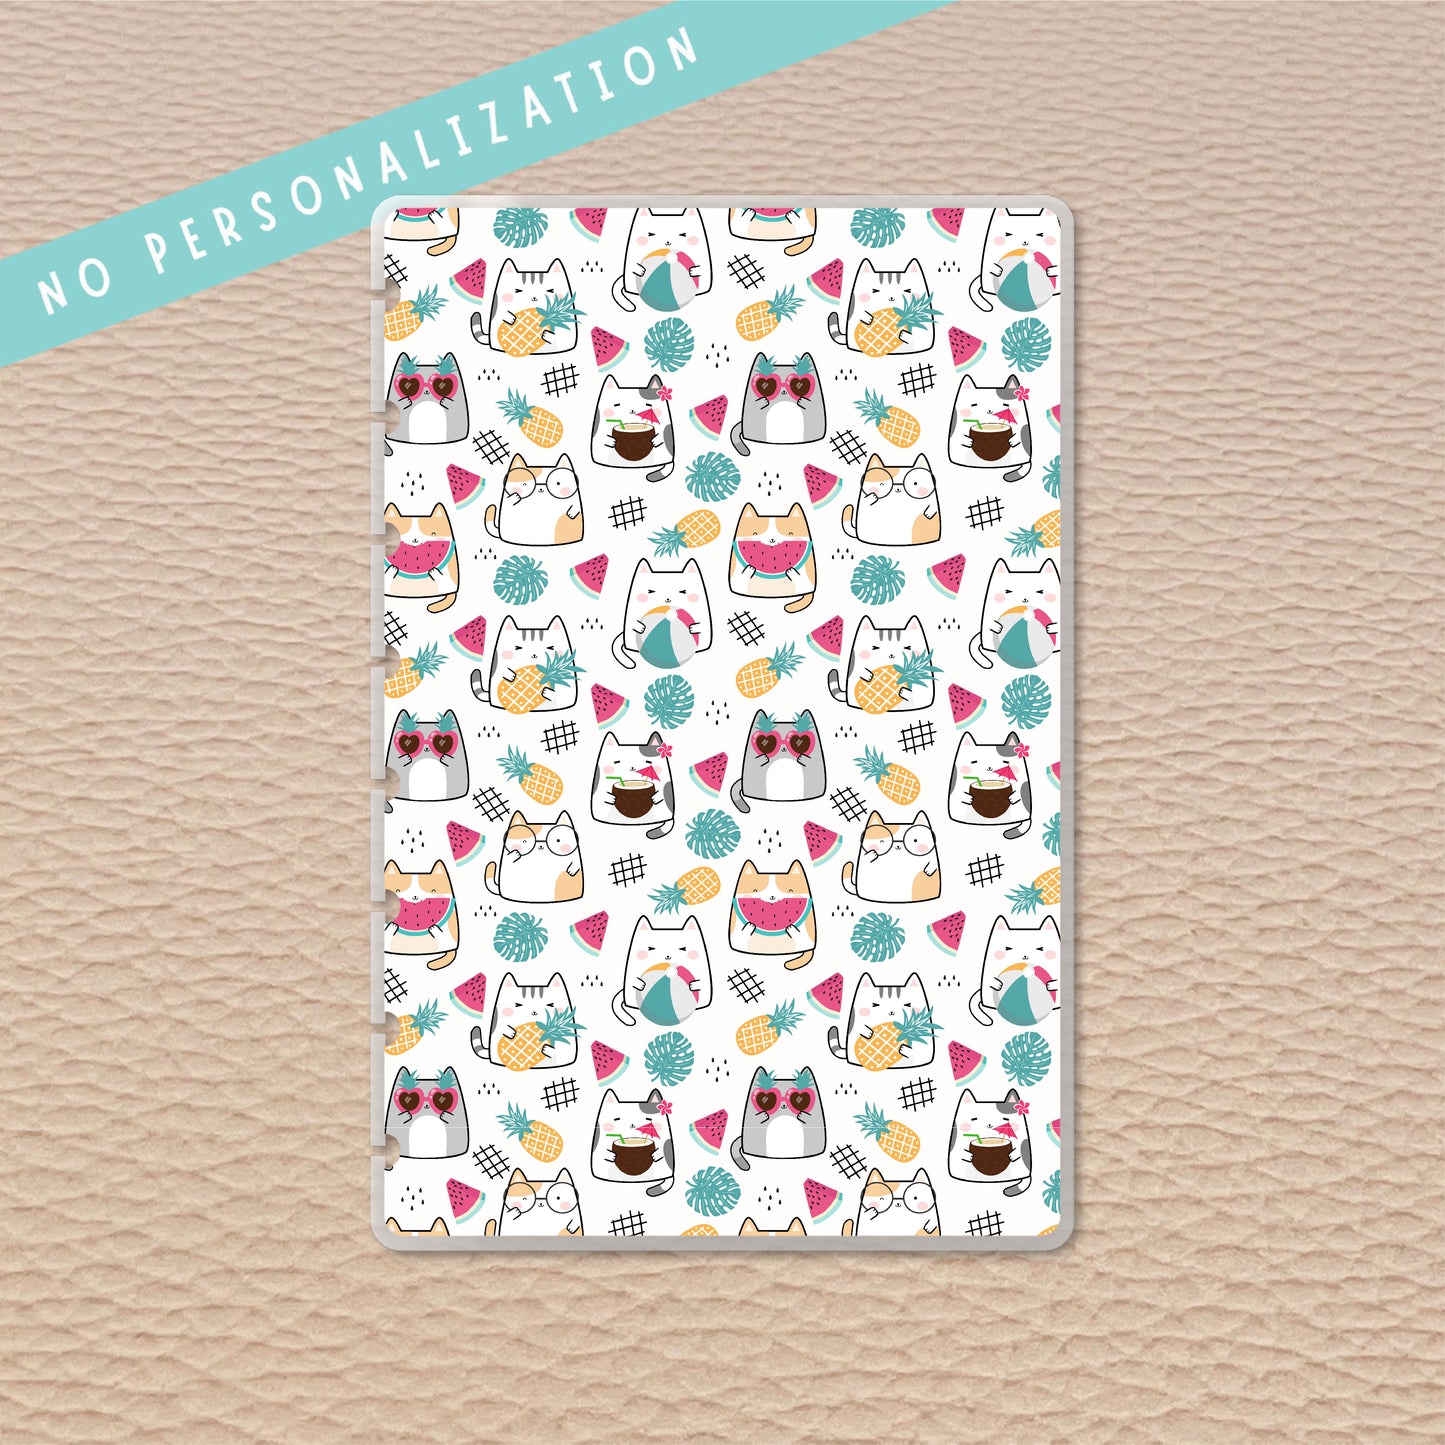 Summer Cats Junior Discbound Notebook Covers